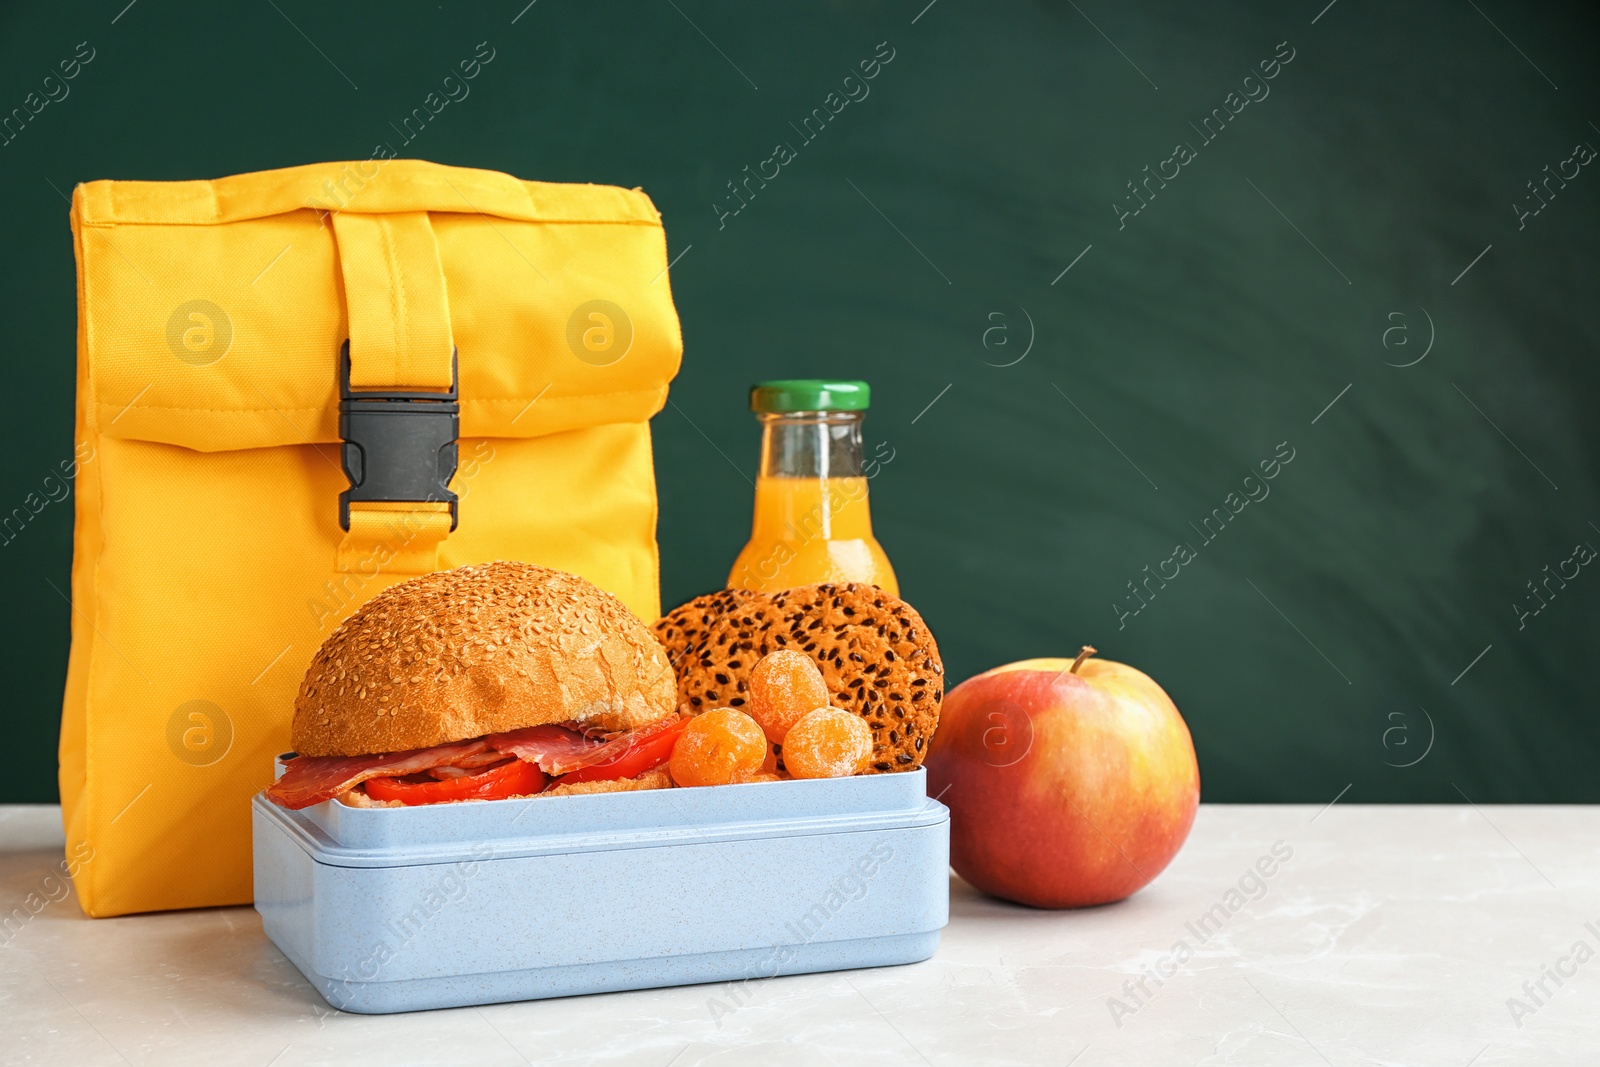 Photo of Lunch box with appetizing food and bag on table near chalkboard